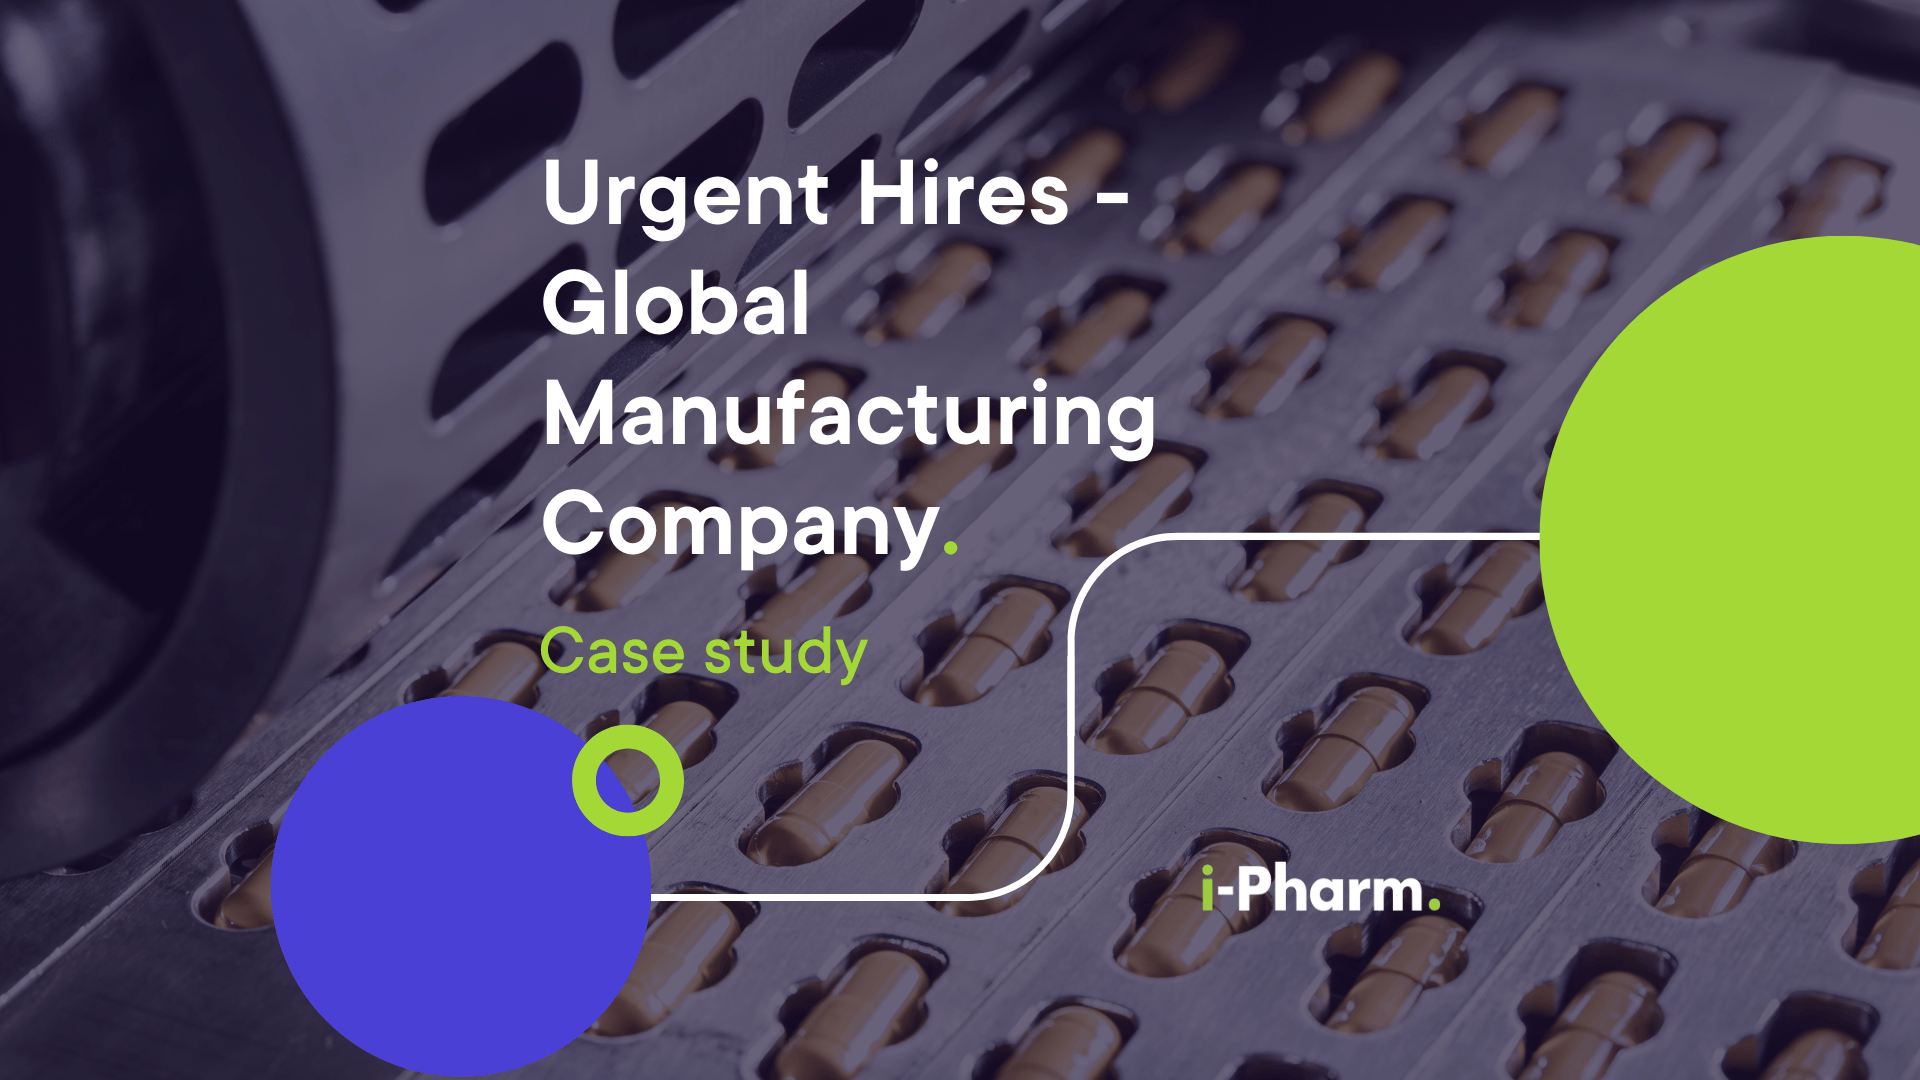 Case Study: Urgent Hires for Global Manufacturing Company